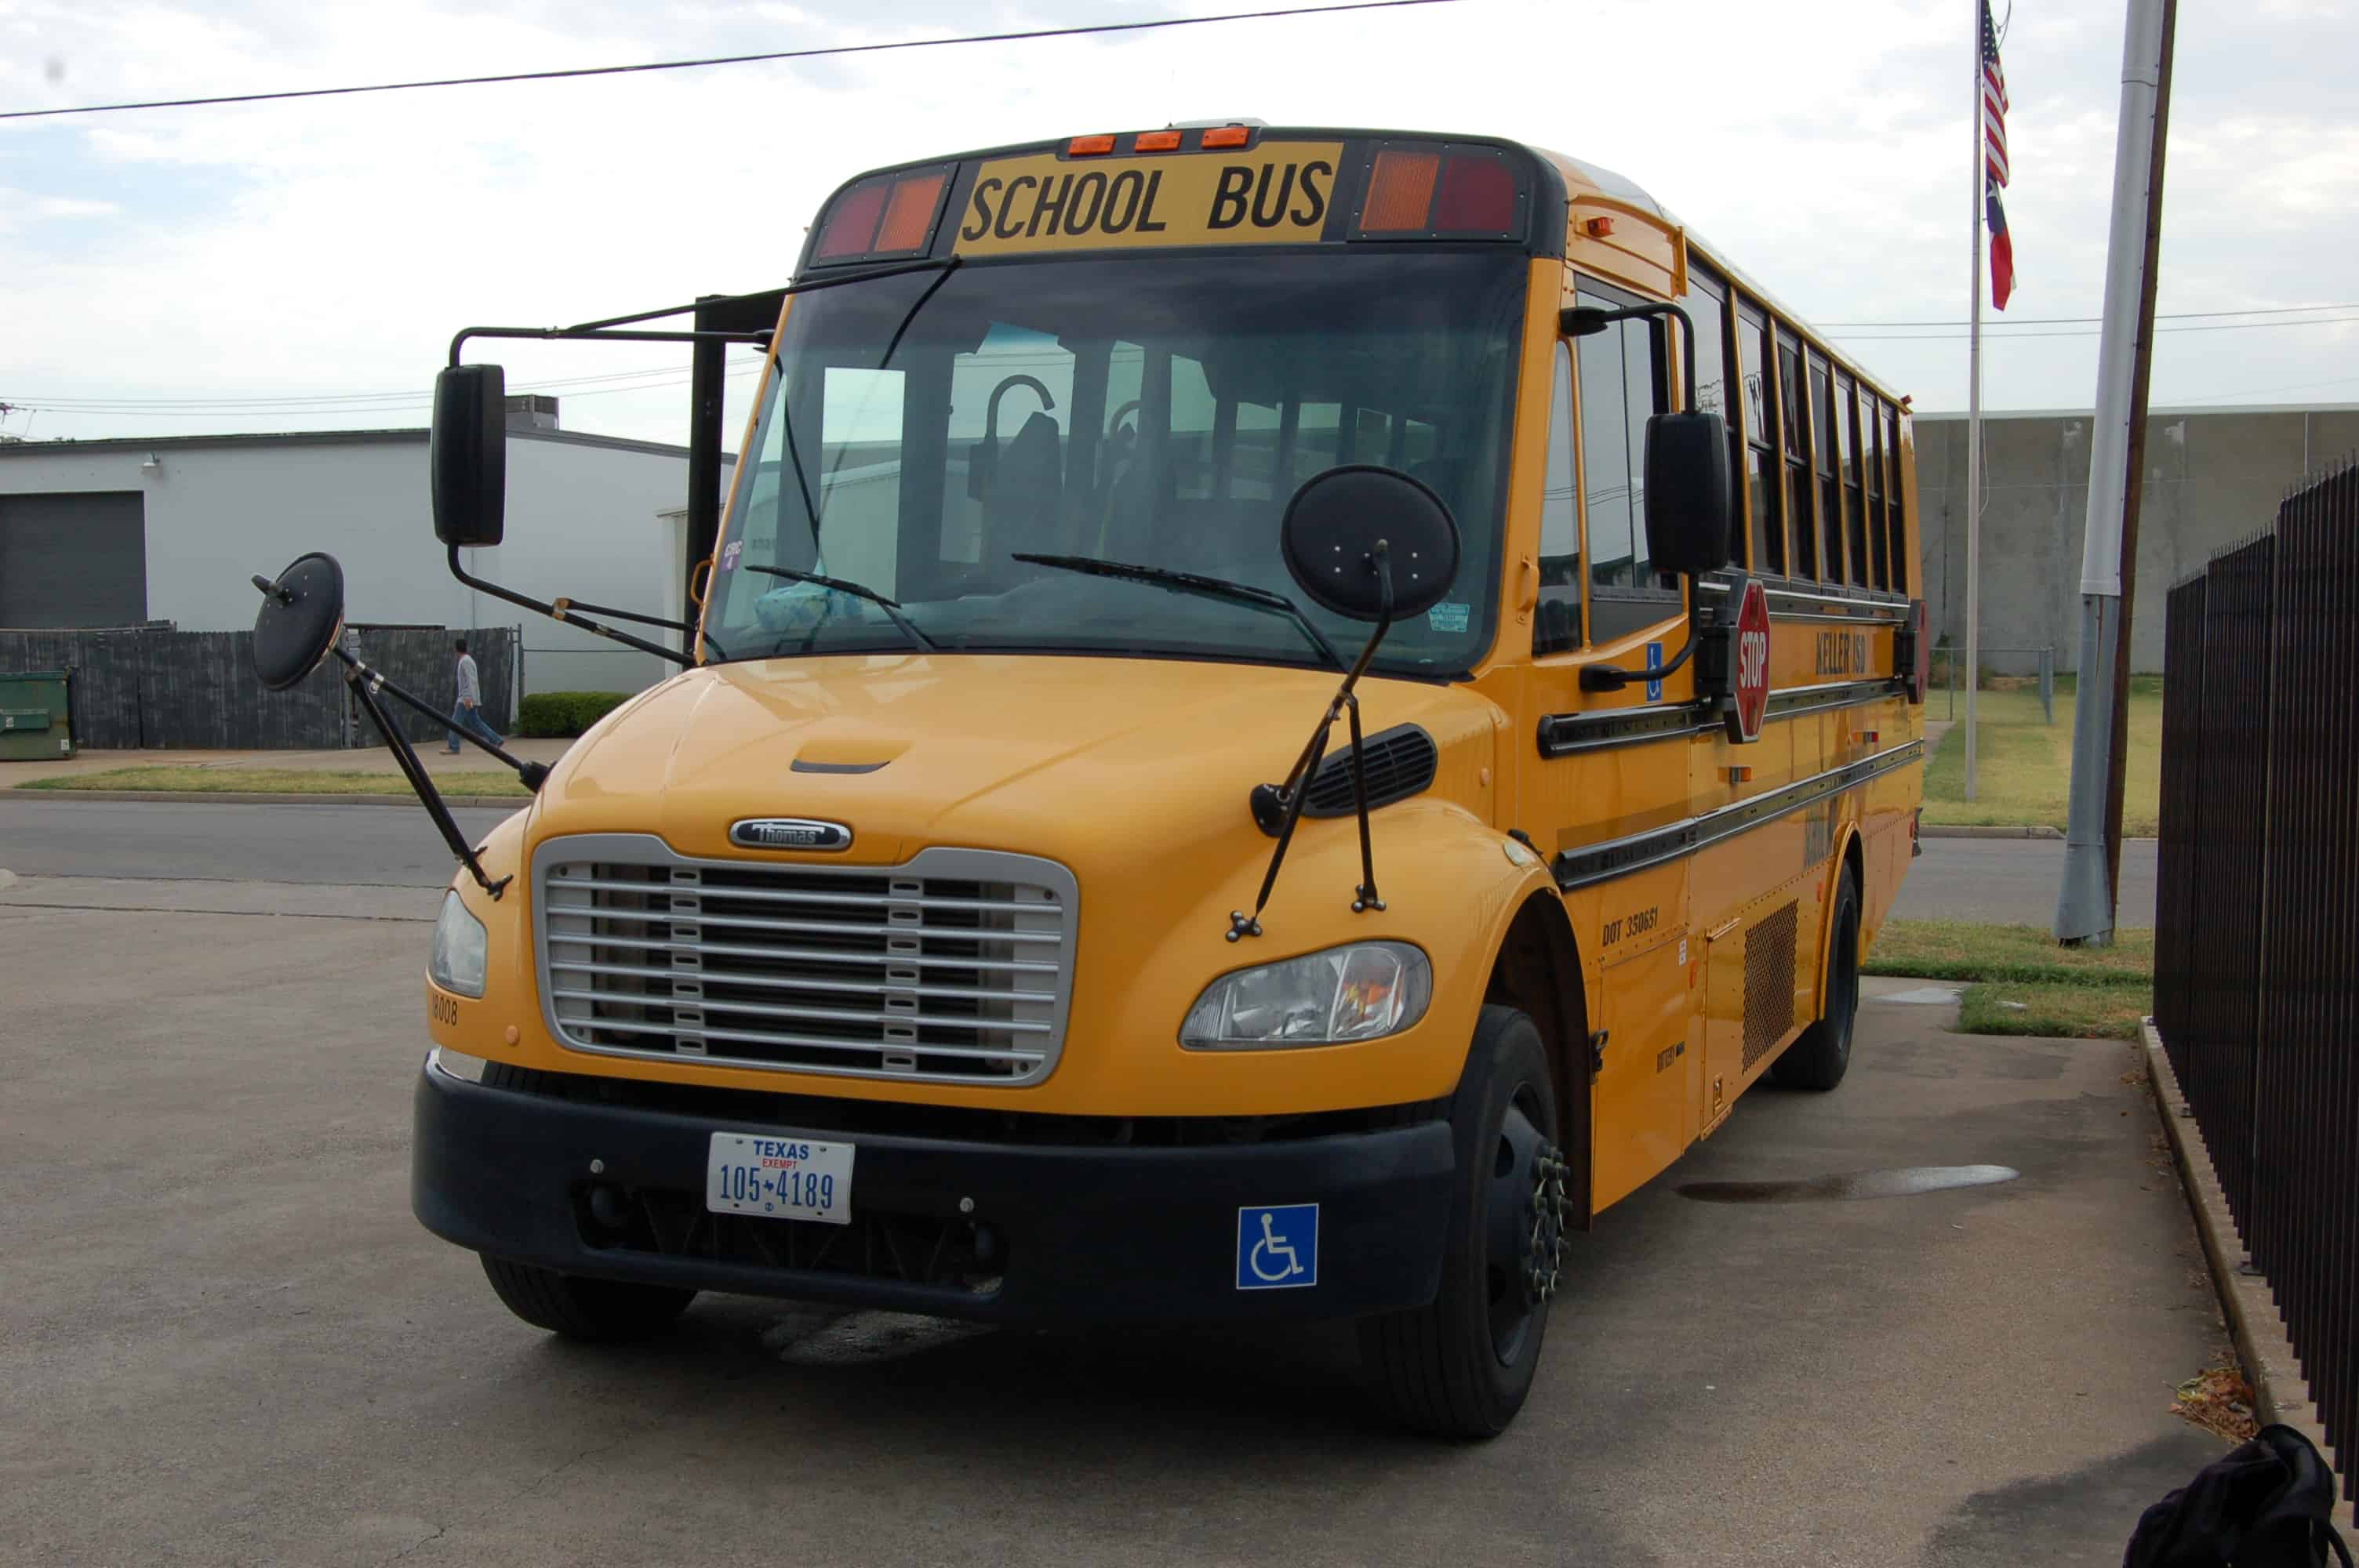 A/C is increasingly becoming more popular in many school buses, especially in southern states like Texas.